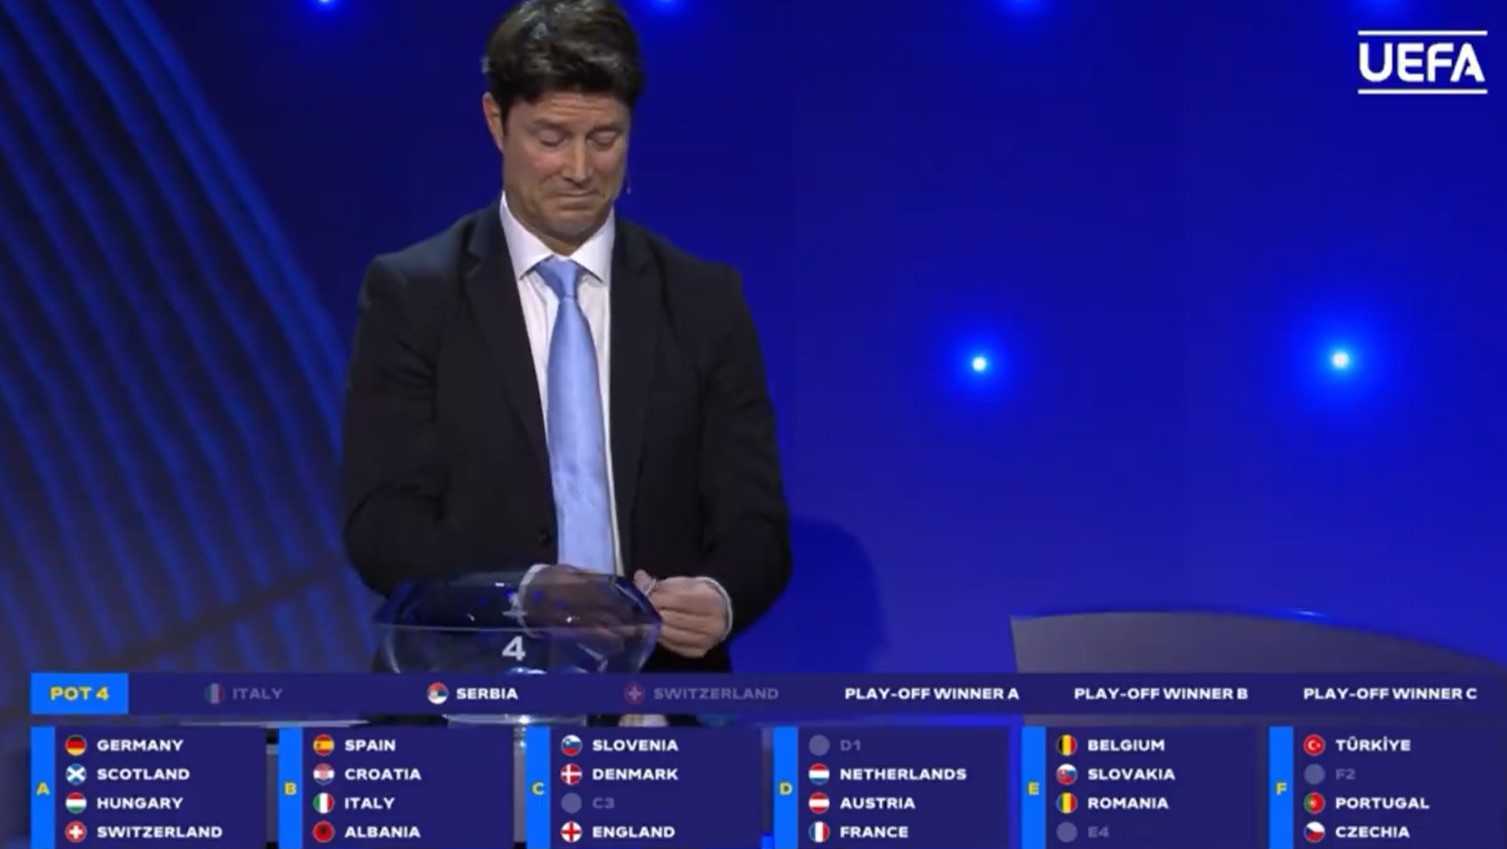 Uefa Awkward Interruption during Euro 2024 draw by ‘pornographic moaning noises’ disruptions